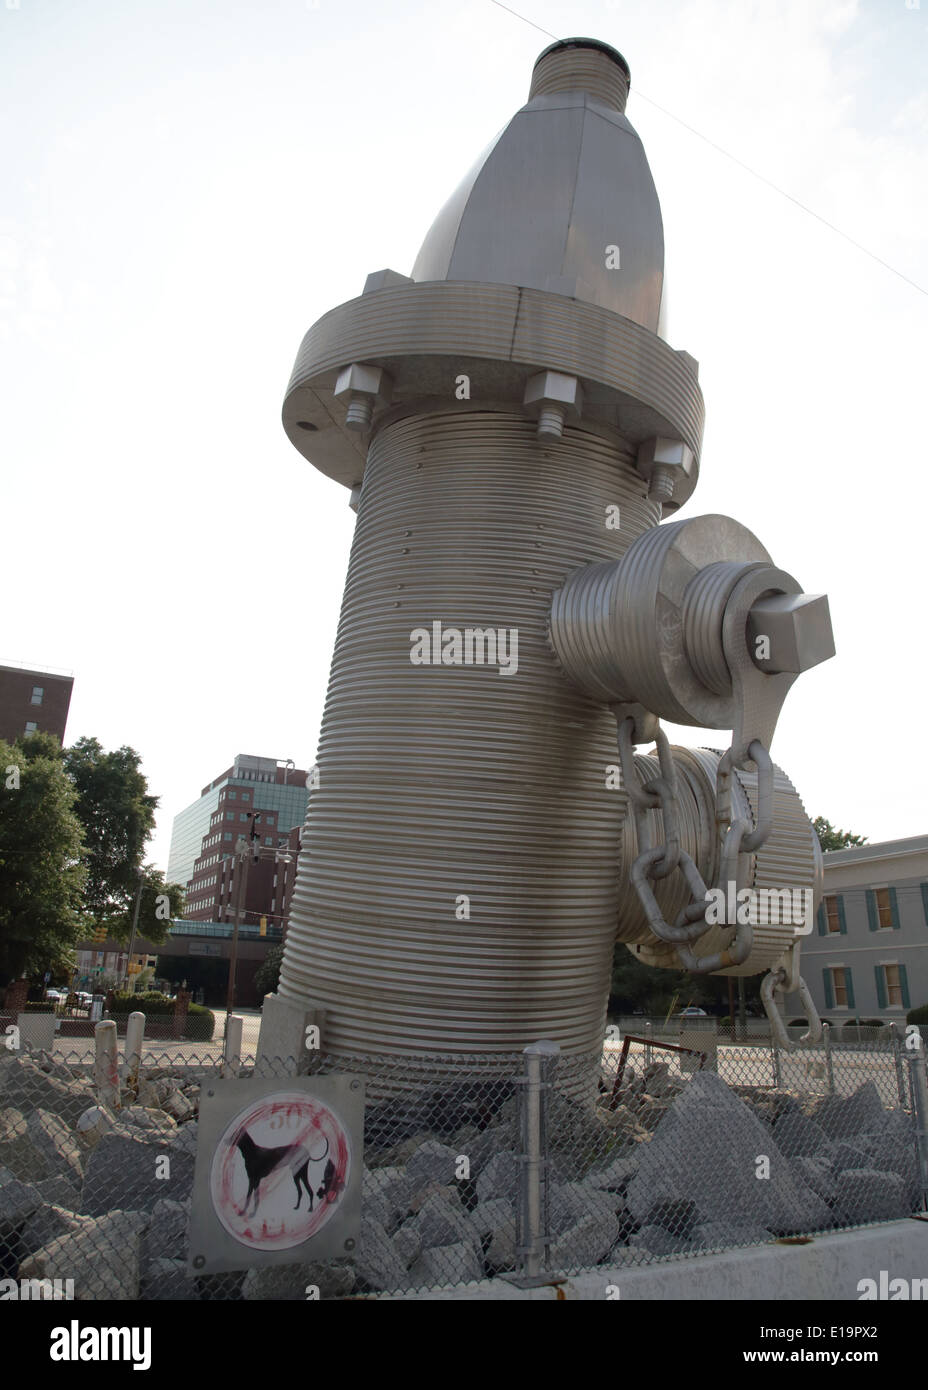 World's Largest Fire Hydrant , was officially unveiled to the city of Columbia, South Carolina on February 18, 2001. The fire hydrant is 39 ft. tall with nearly five ton steel sculpture set in a concrete base .Photos by Catherine Brown Stock Photo